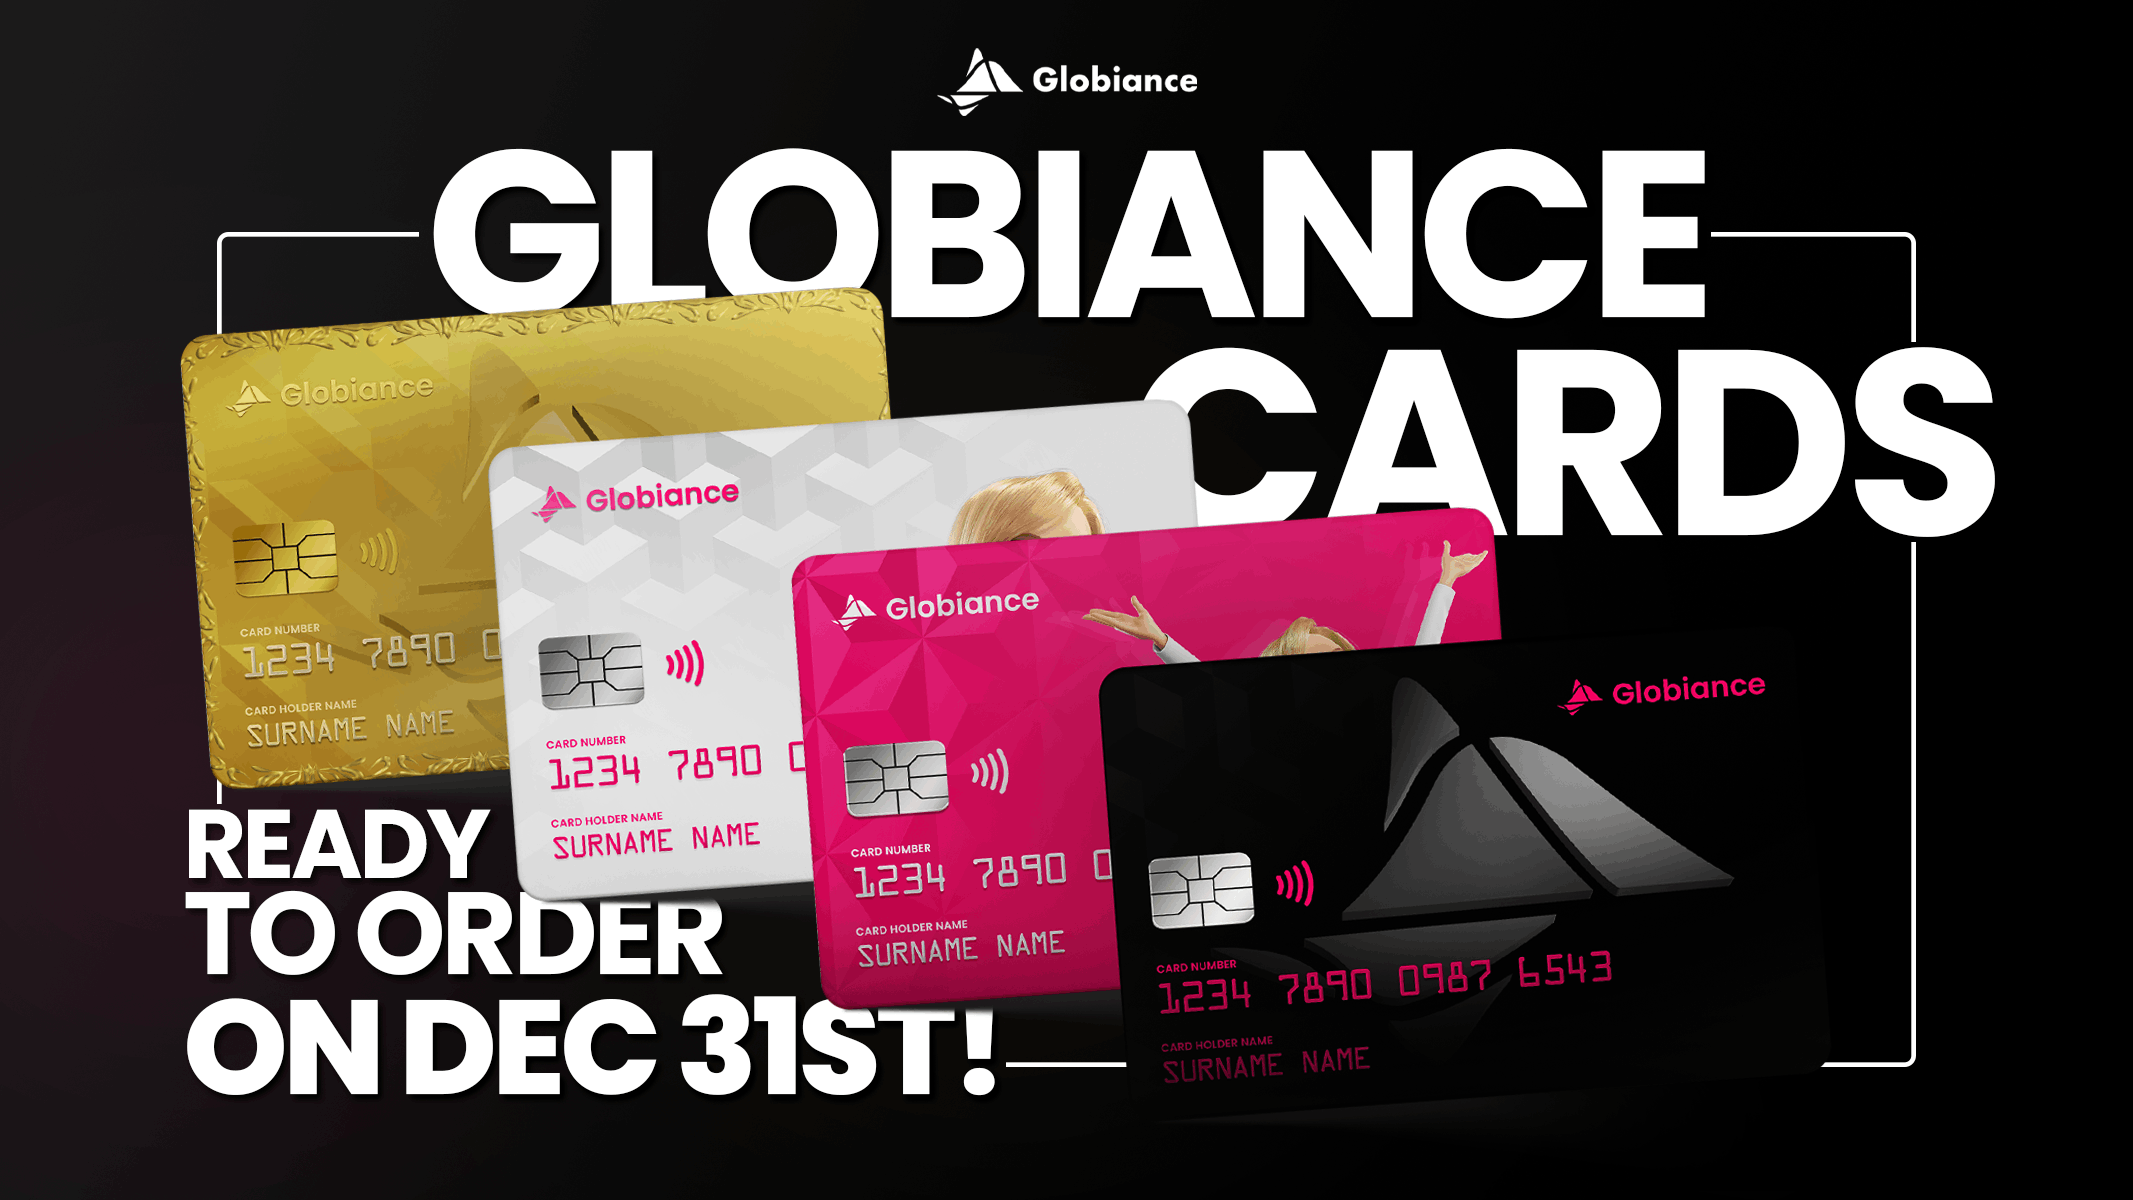 New Globiance Cards Set To Transform Digital And Traditional Financial Management